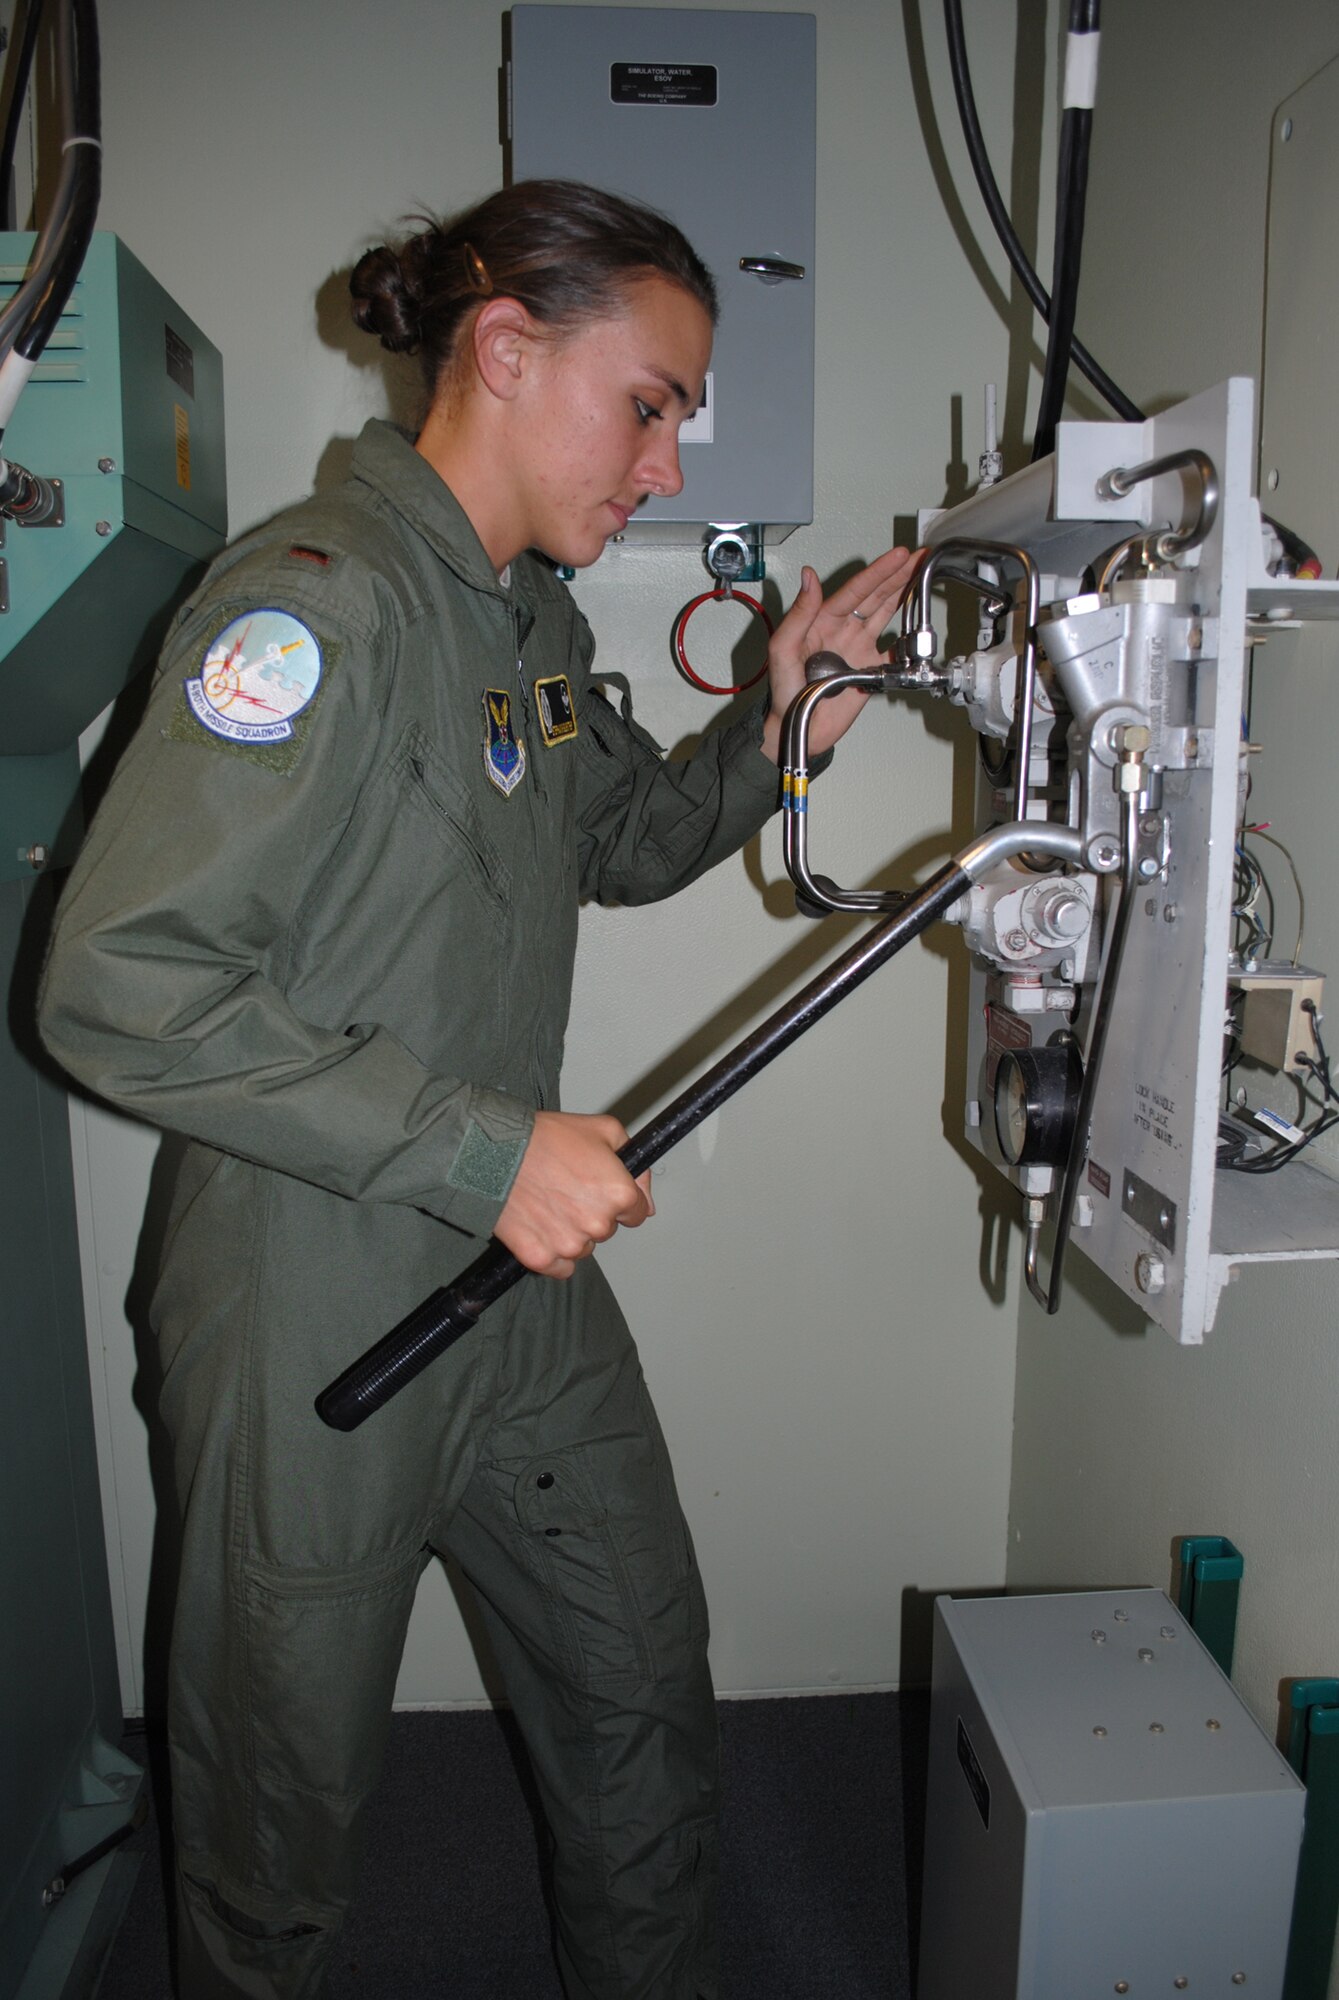 Guenther checks the settings on equipment in the missile procedures trainer on Aug. 17. Ten missileers, including two trainers and two alternate crew members, are training in the MPT six days a week in preparation for the competition. (U.S. Air Force photo/Airman 1st Class Katrina Heikkinen)